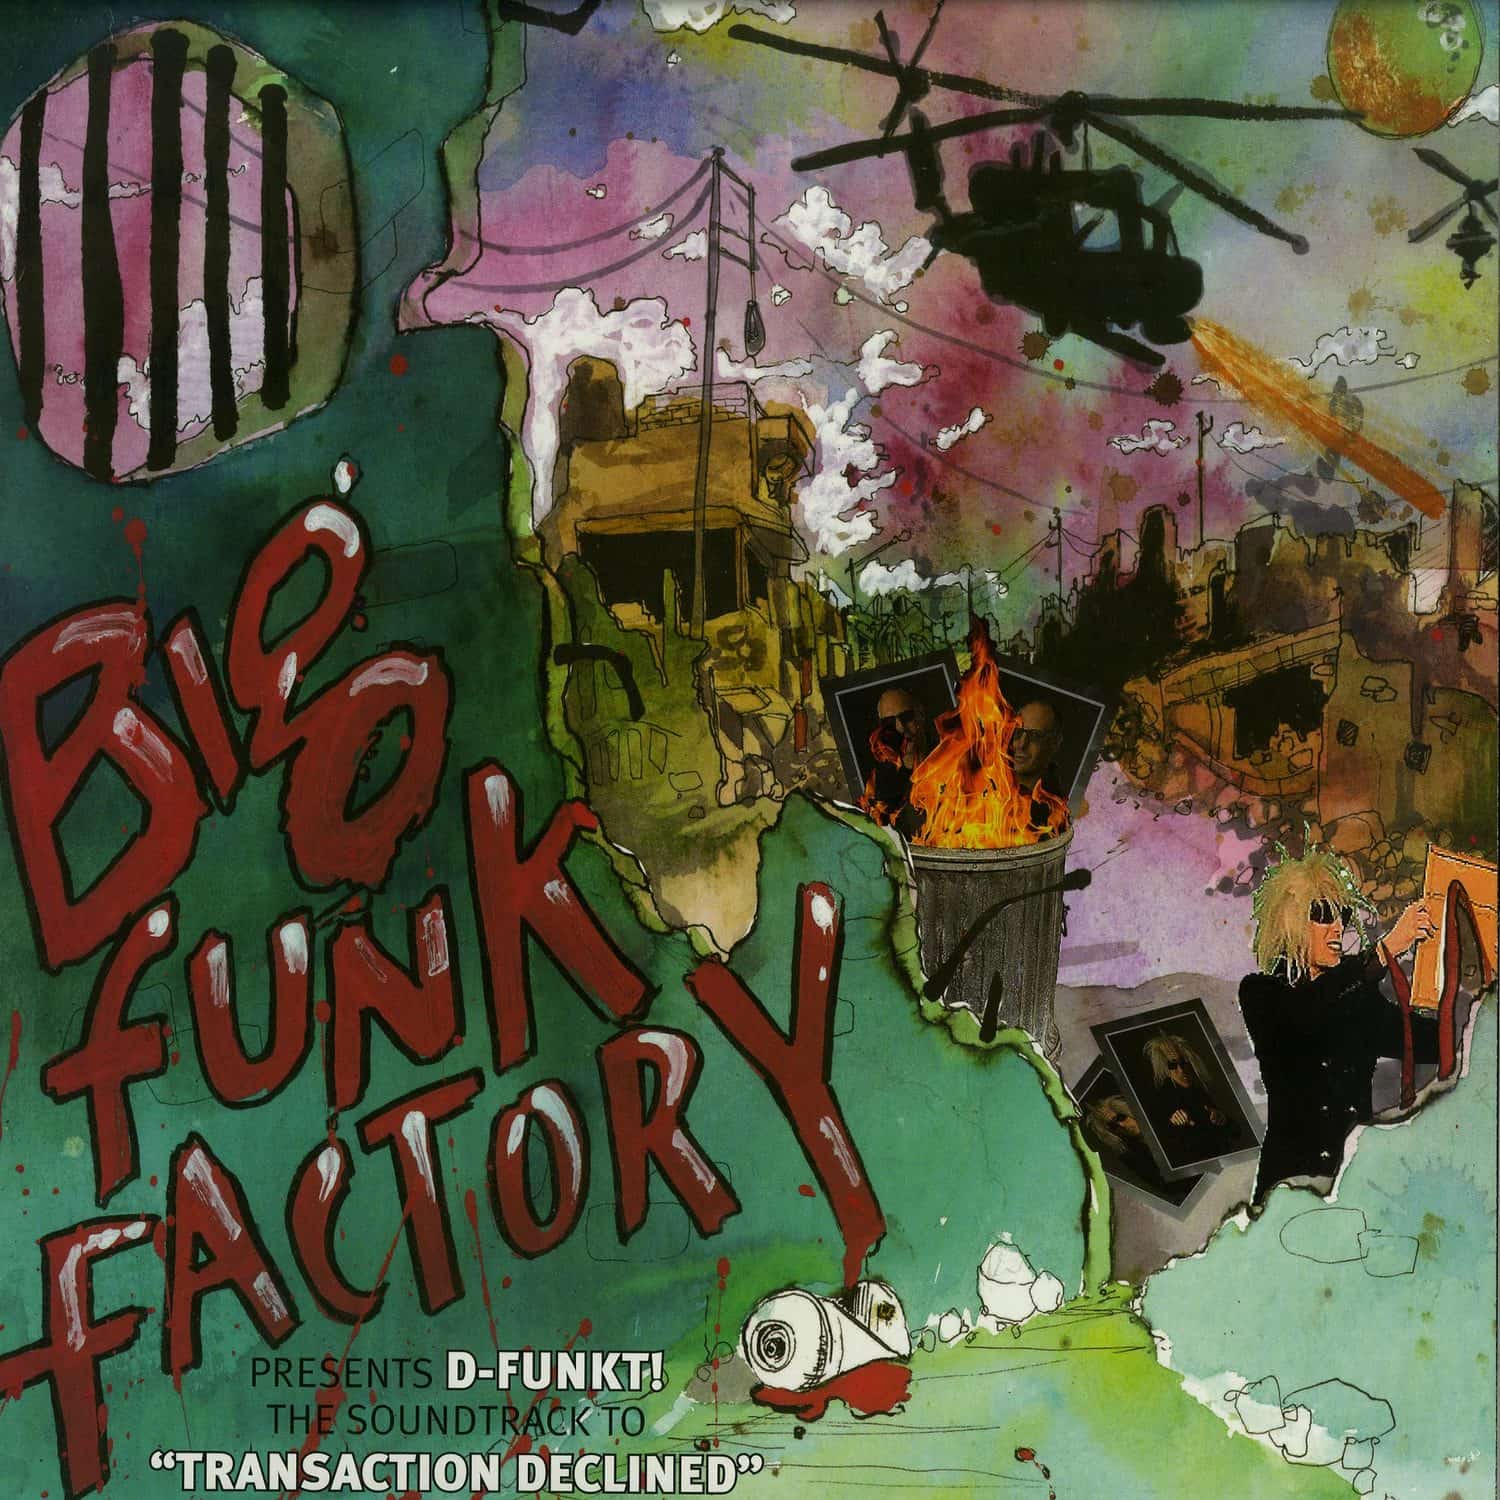 Big Funk Factory Presents D-Funkt! - THE SOUNDTRACK TO TRANSACTION DECLINED 